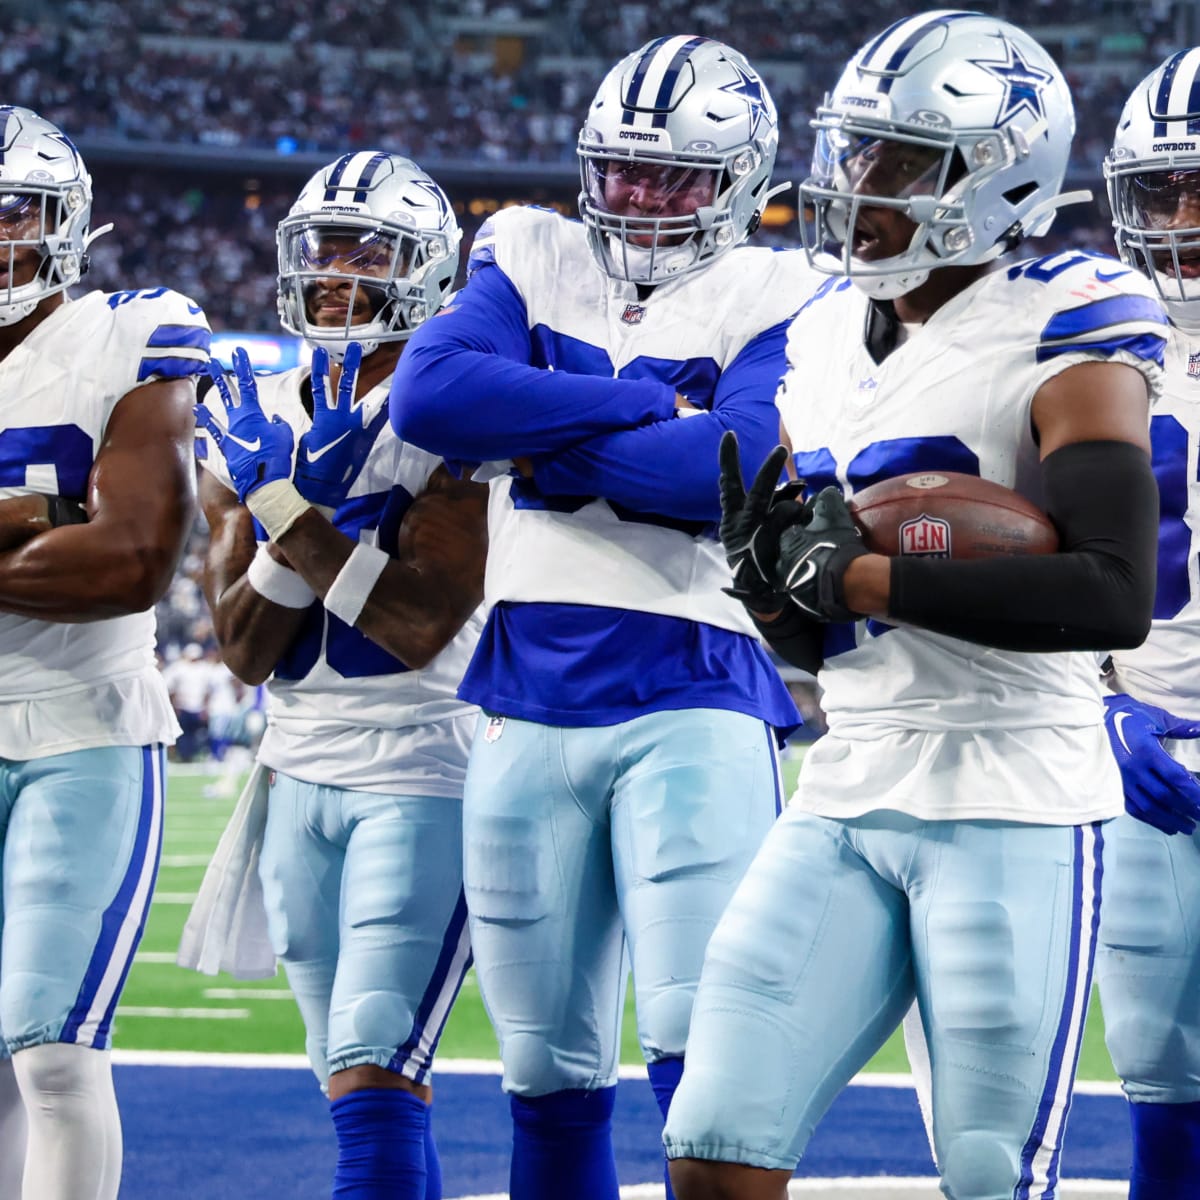 The Cowboys offense will need to give more help to defense in Week